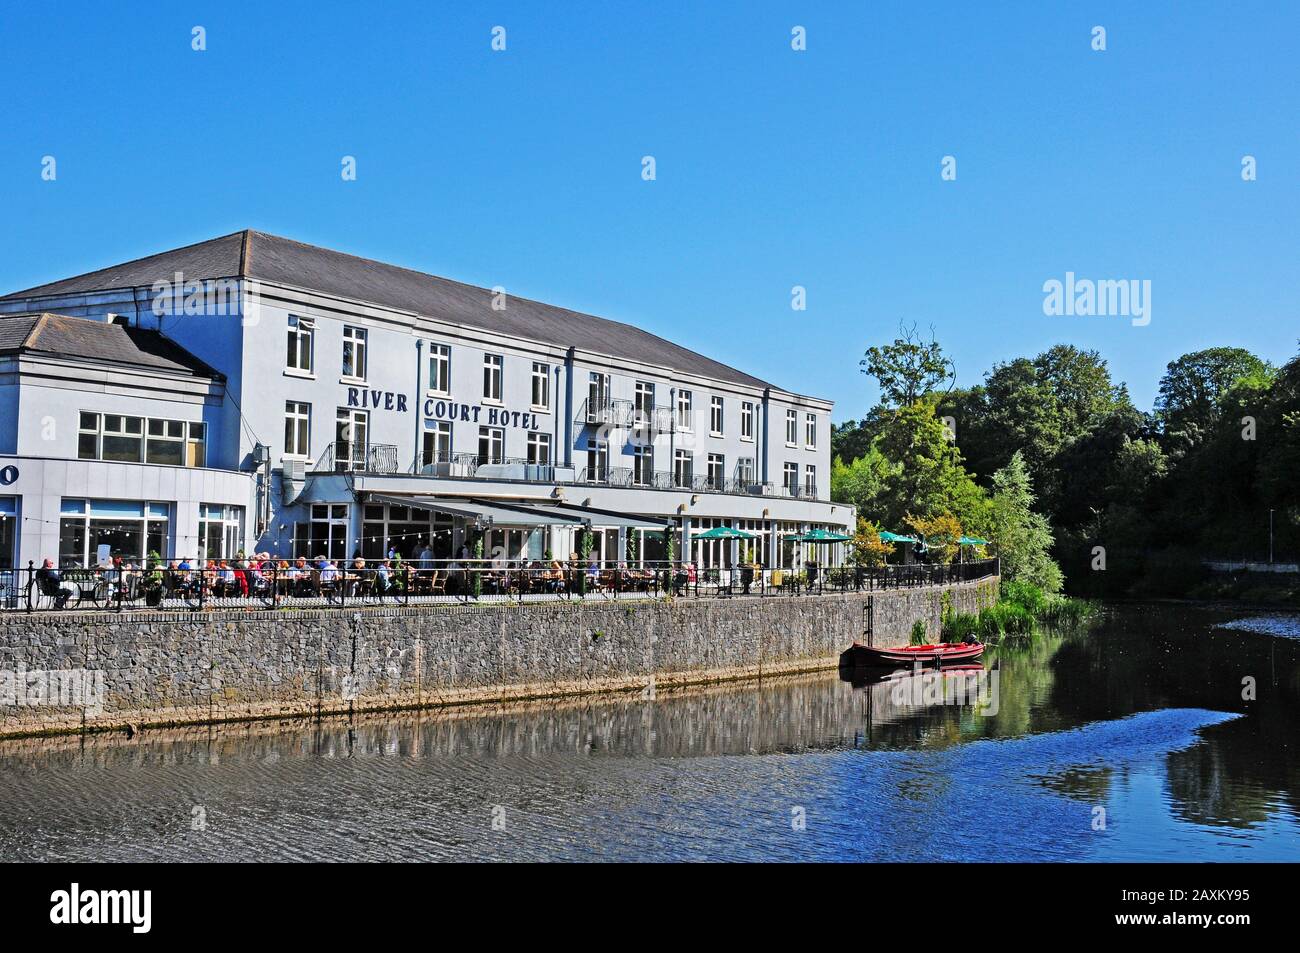 River Court Hotel on River Nore, Kilkenny. Stock Photo